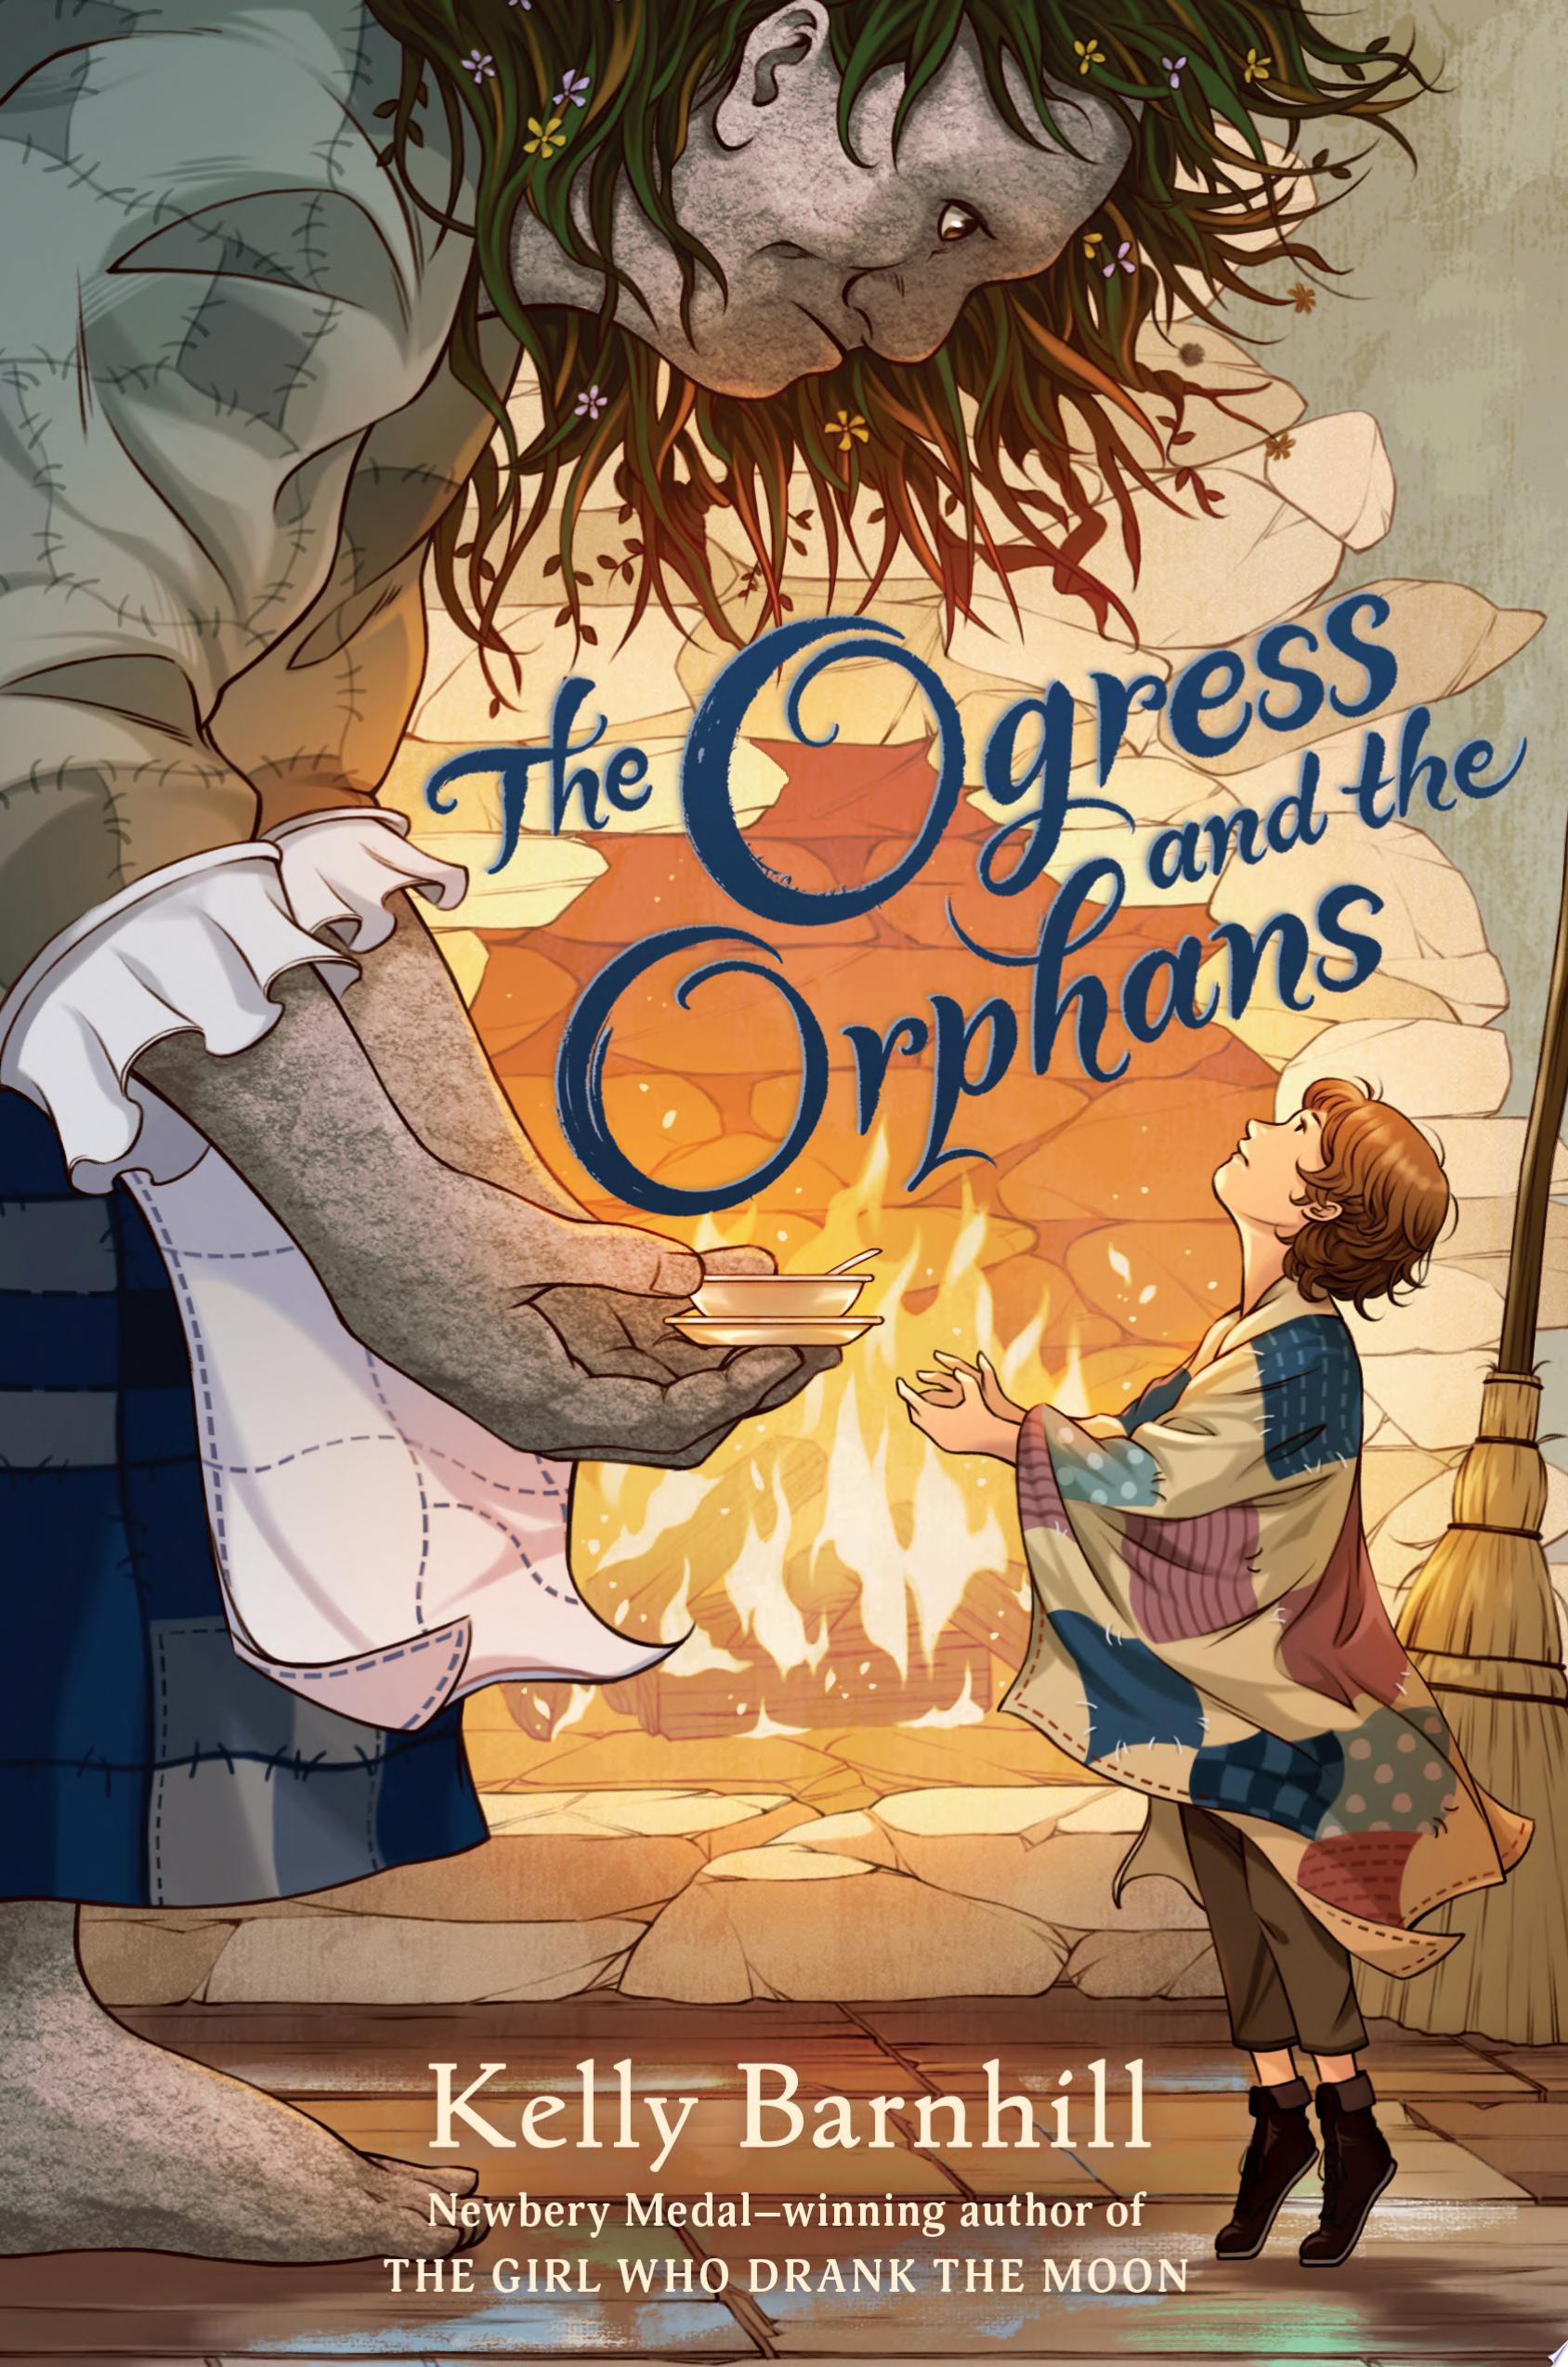 Image for "The Ogress and the Orphans"